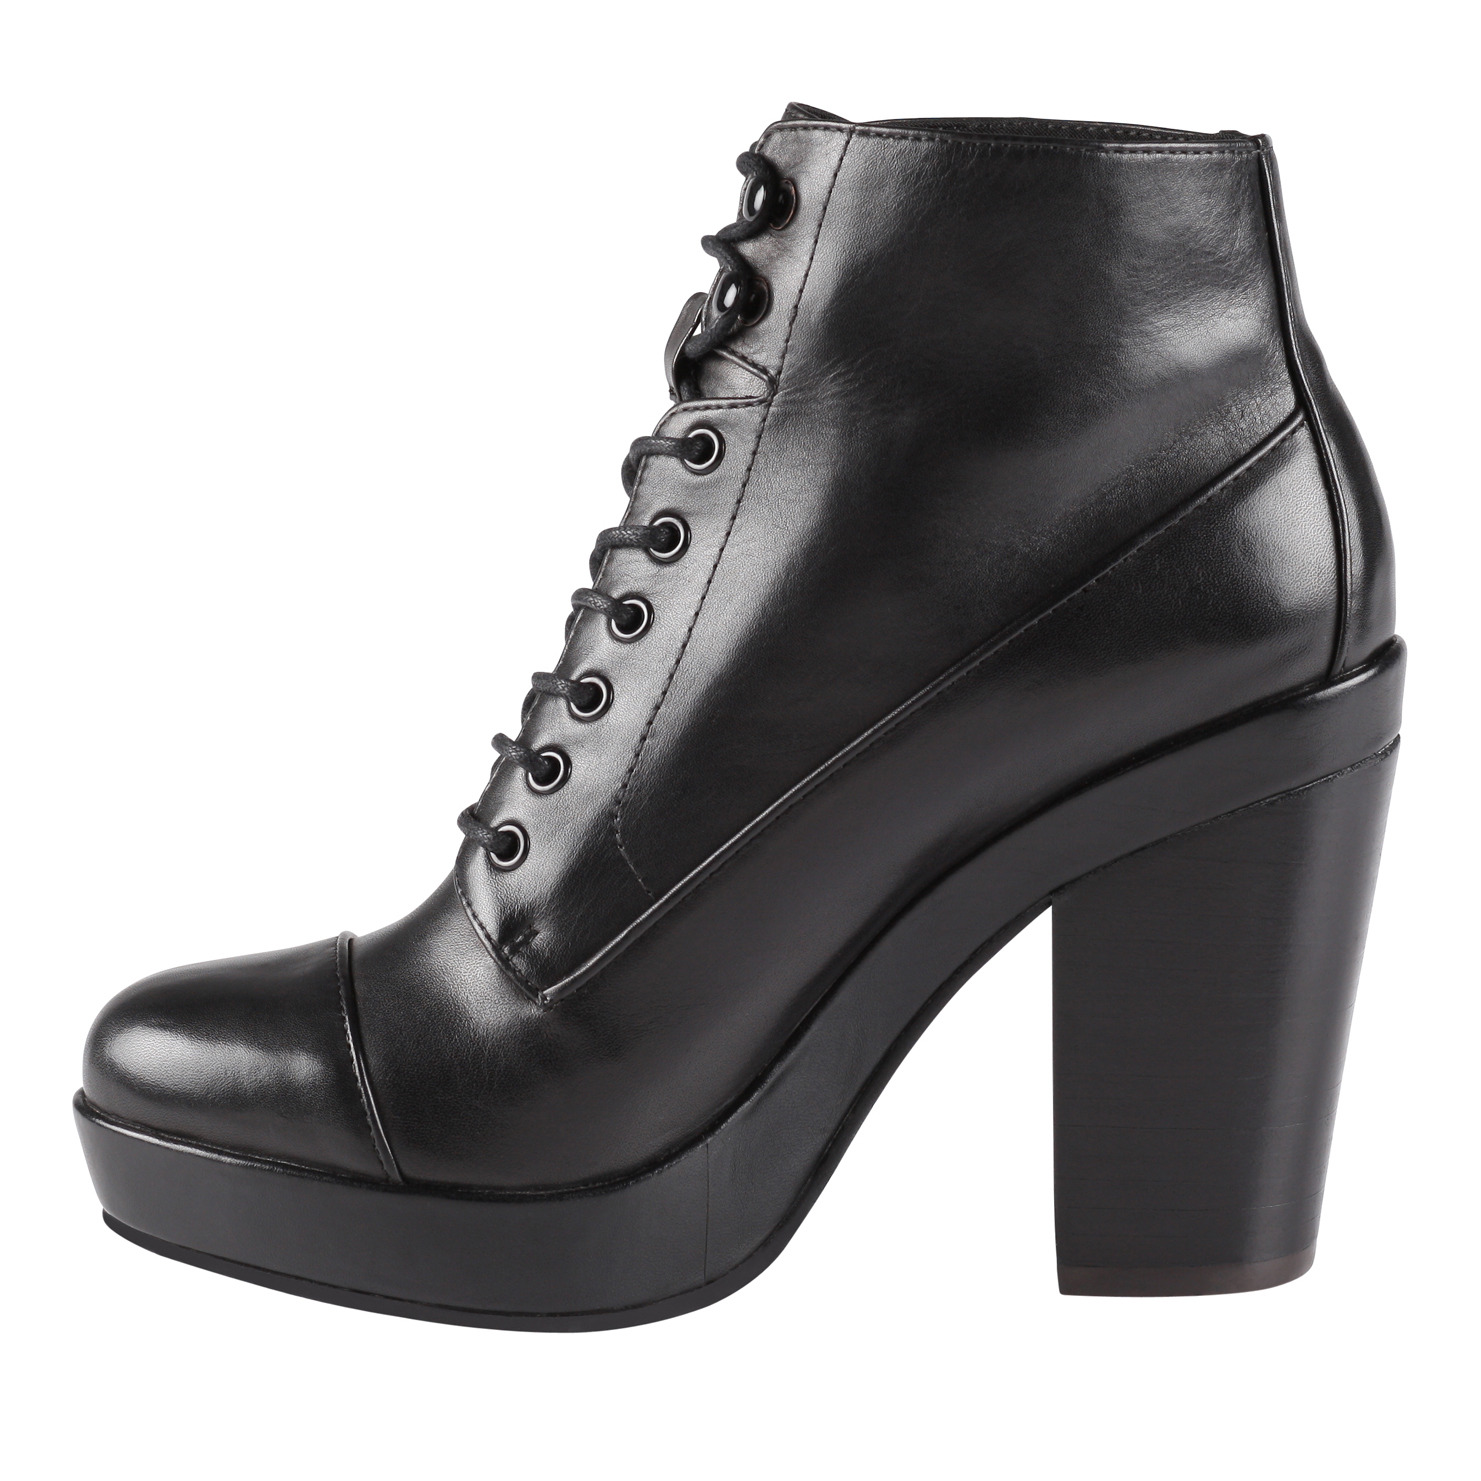 ALDO Leather Mathia Stacked Heel Ankle Boots in Black - Lyst